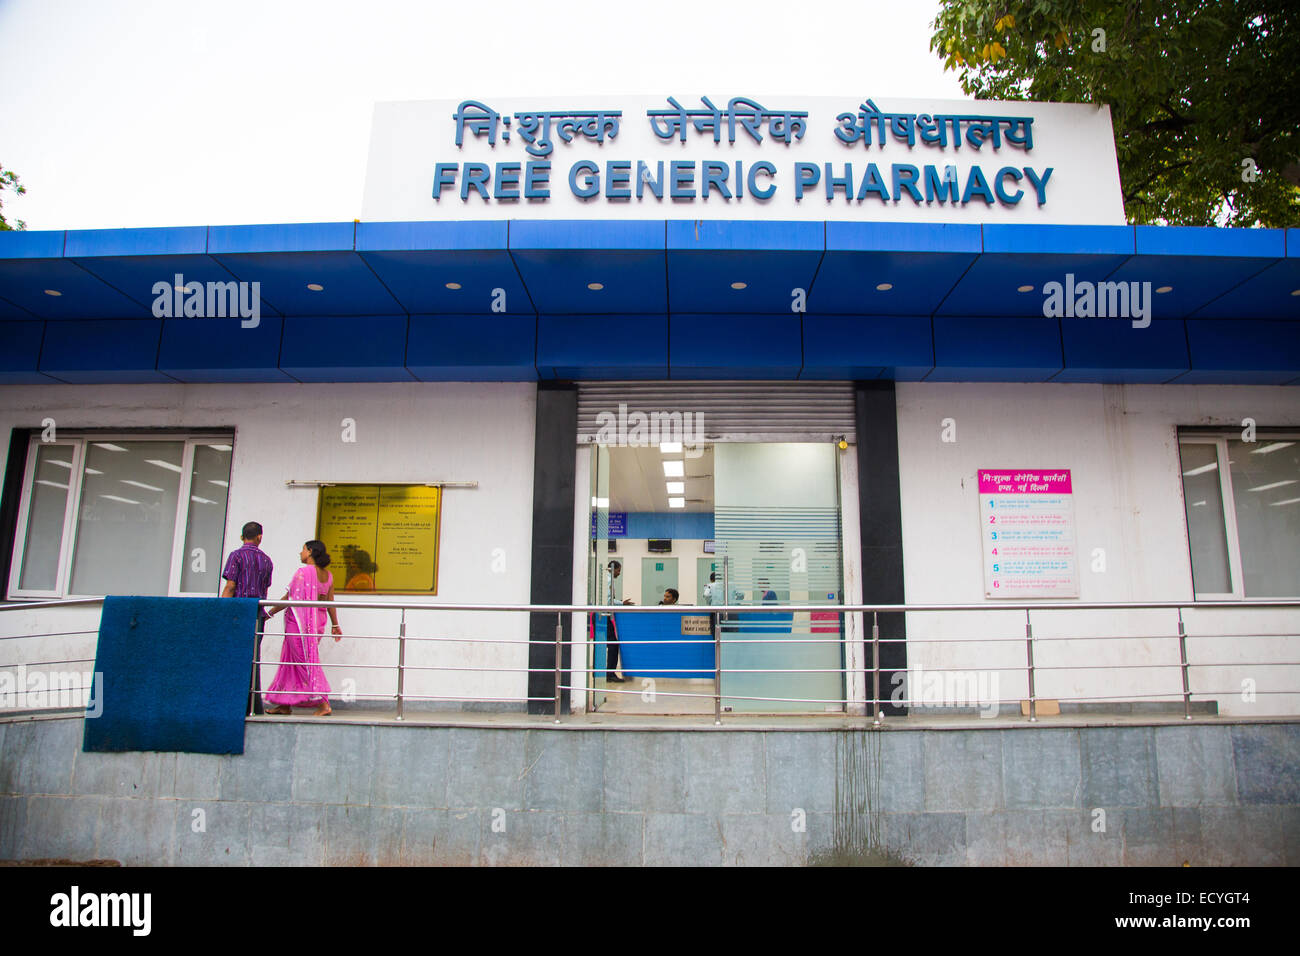 Free Generic Pharmacy All India Institute of Medical Sciences or AIIMS Hospital, Delhi, India Stock Photo